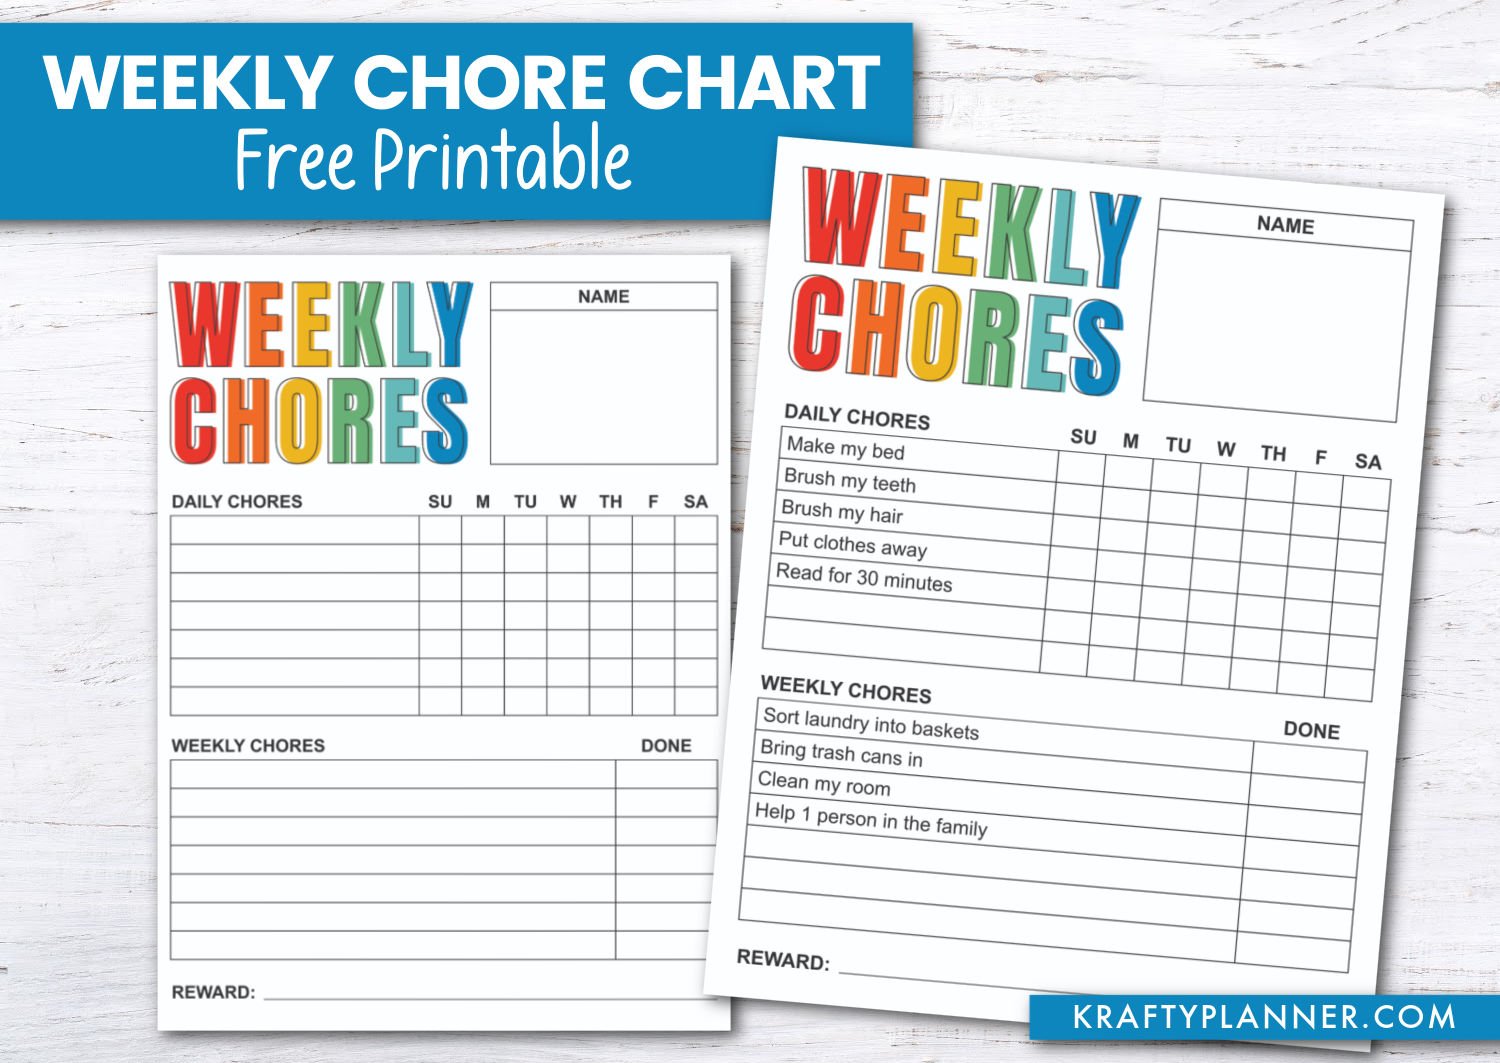 Free Printable Weekly Chore Chart for Kids